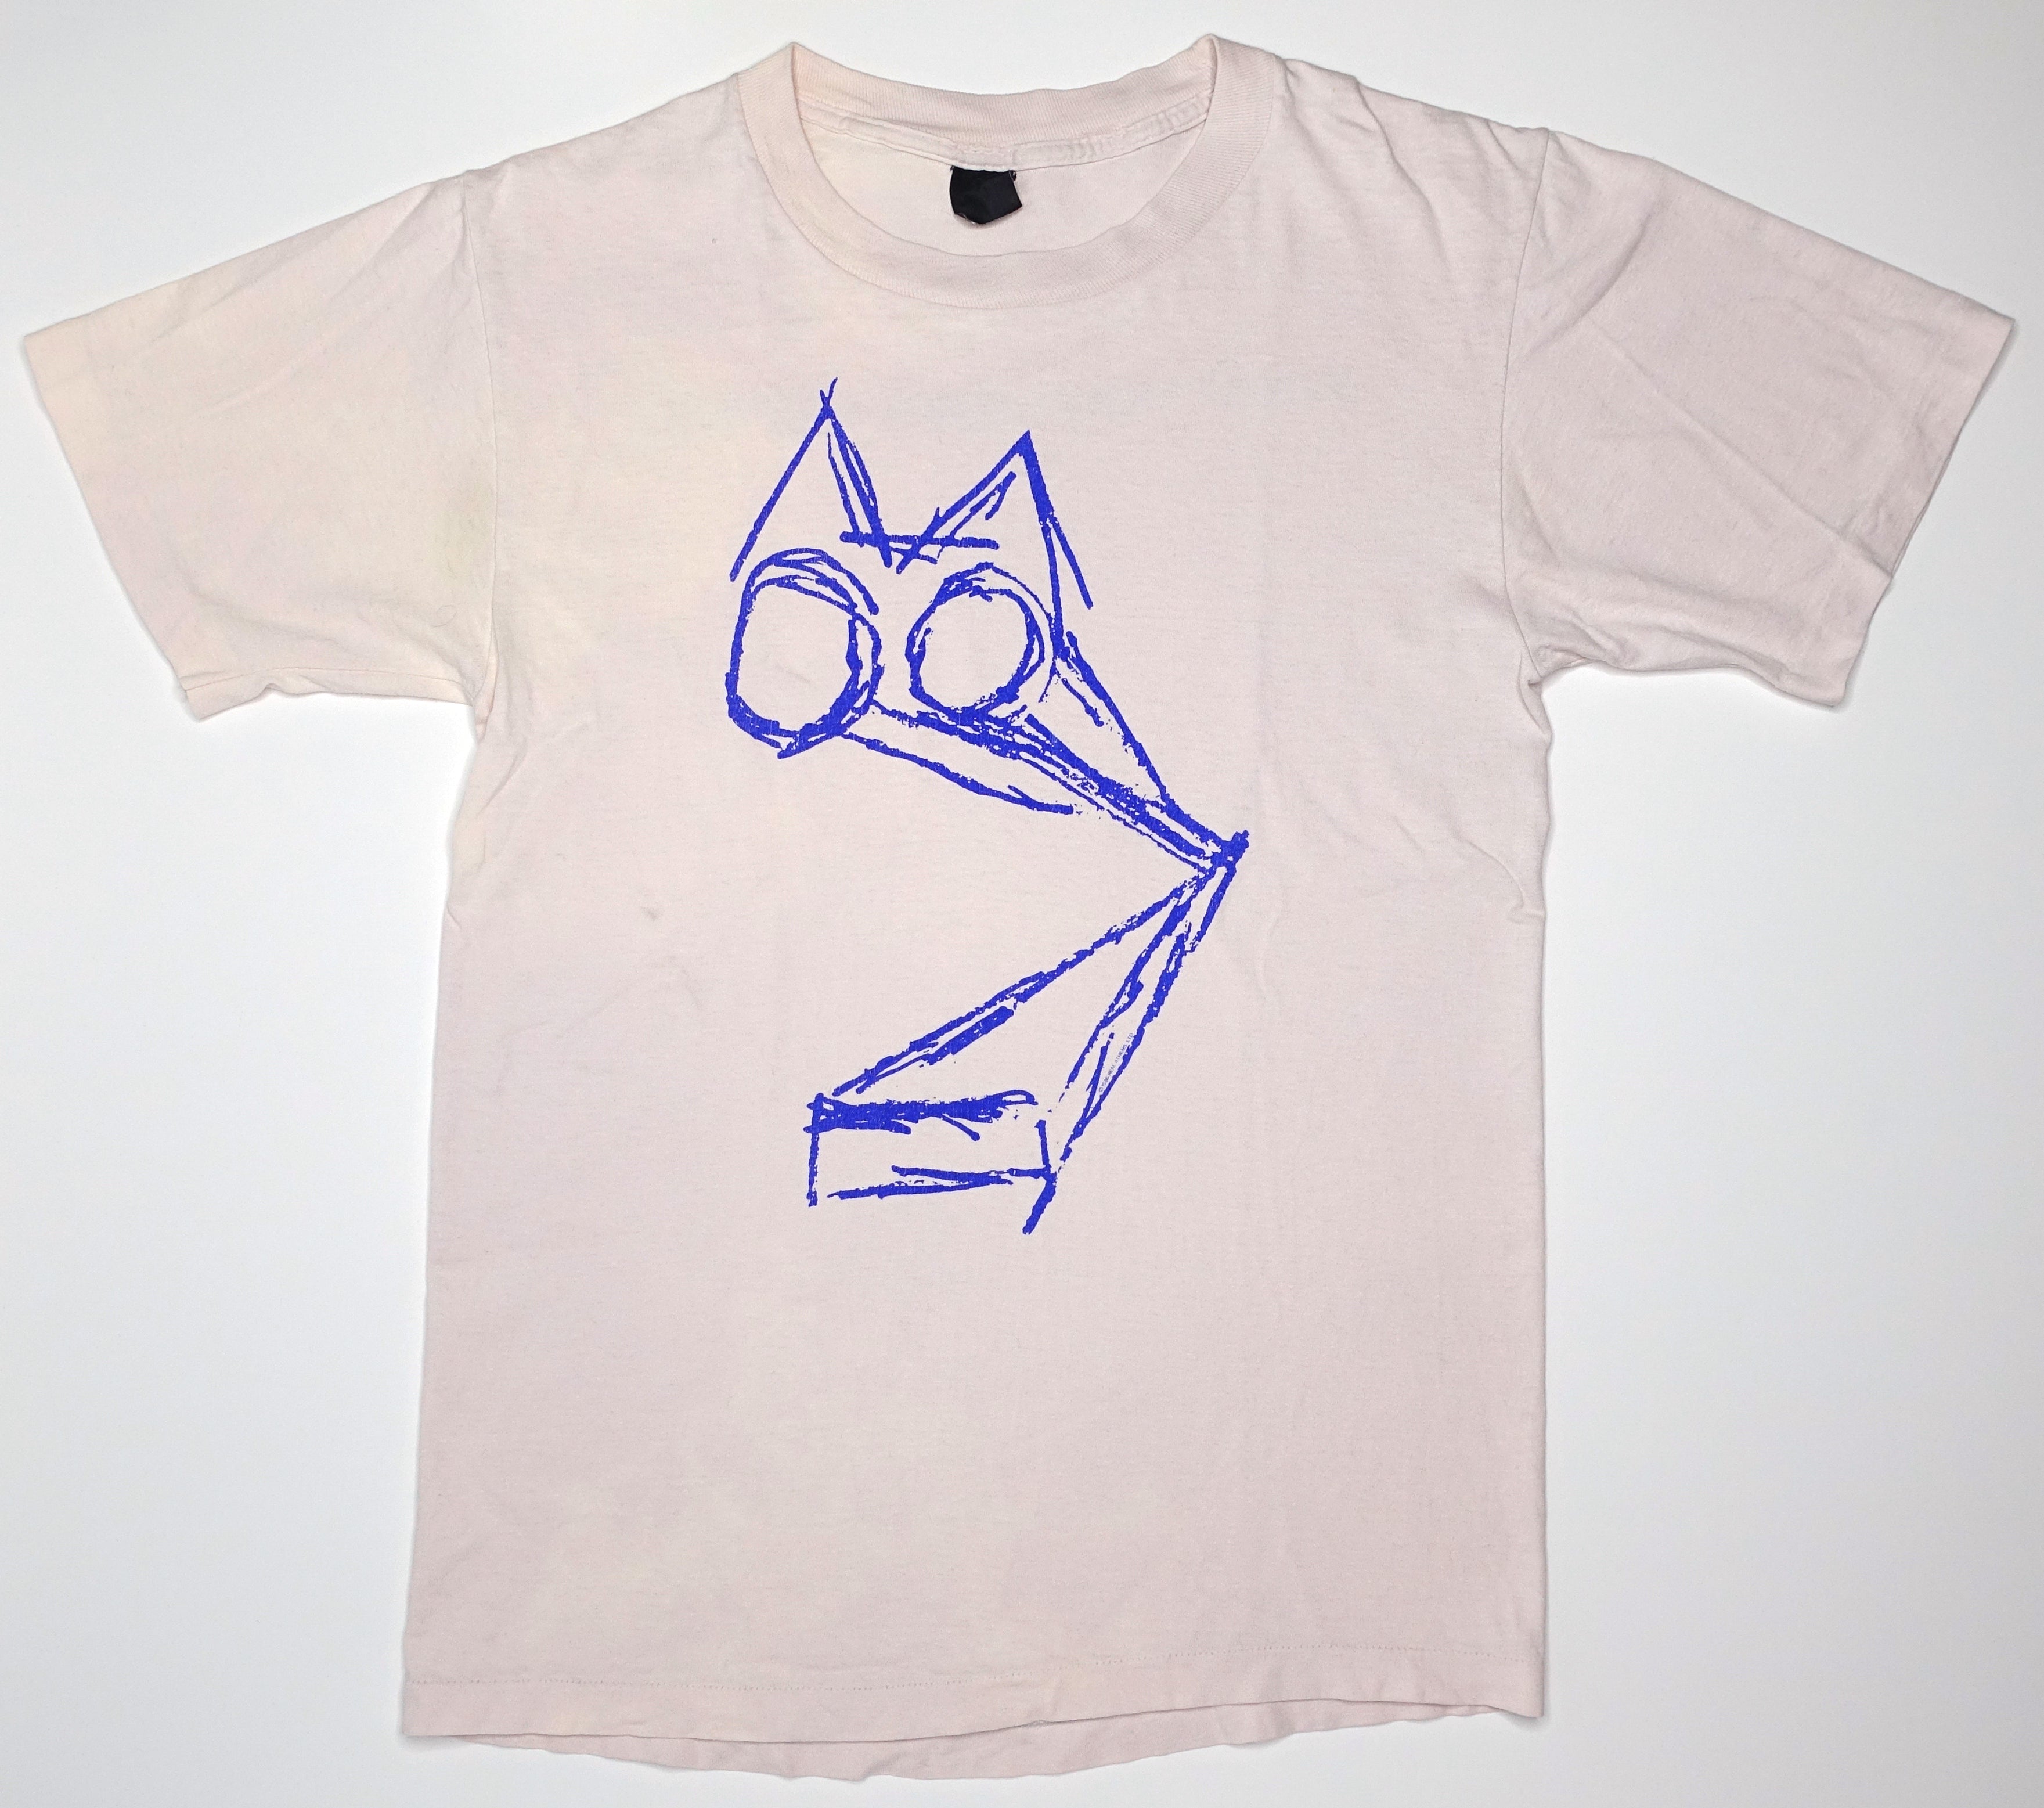 R.E.M. ‎– What Noisy Cats Are We 1986 Tour Shirt Size Medium